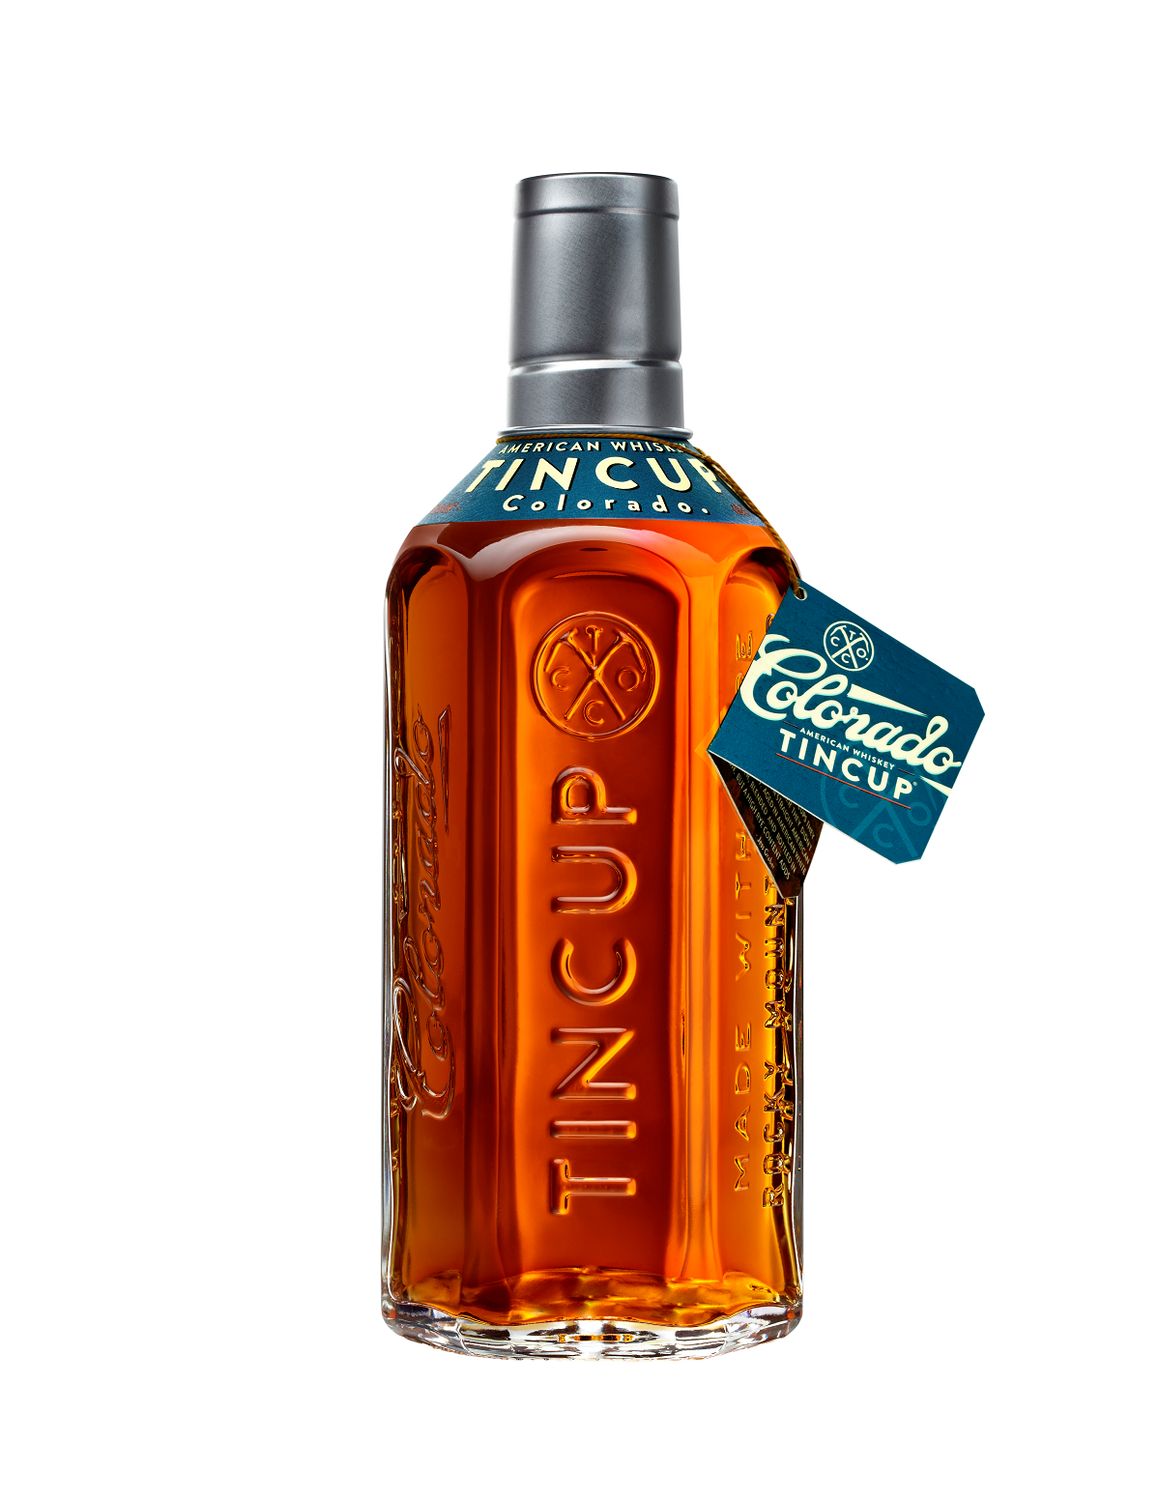 TINCUP AMERICAN WHISKEY, Size: 750 ml